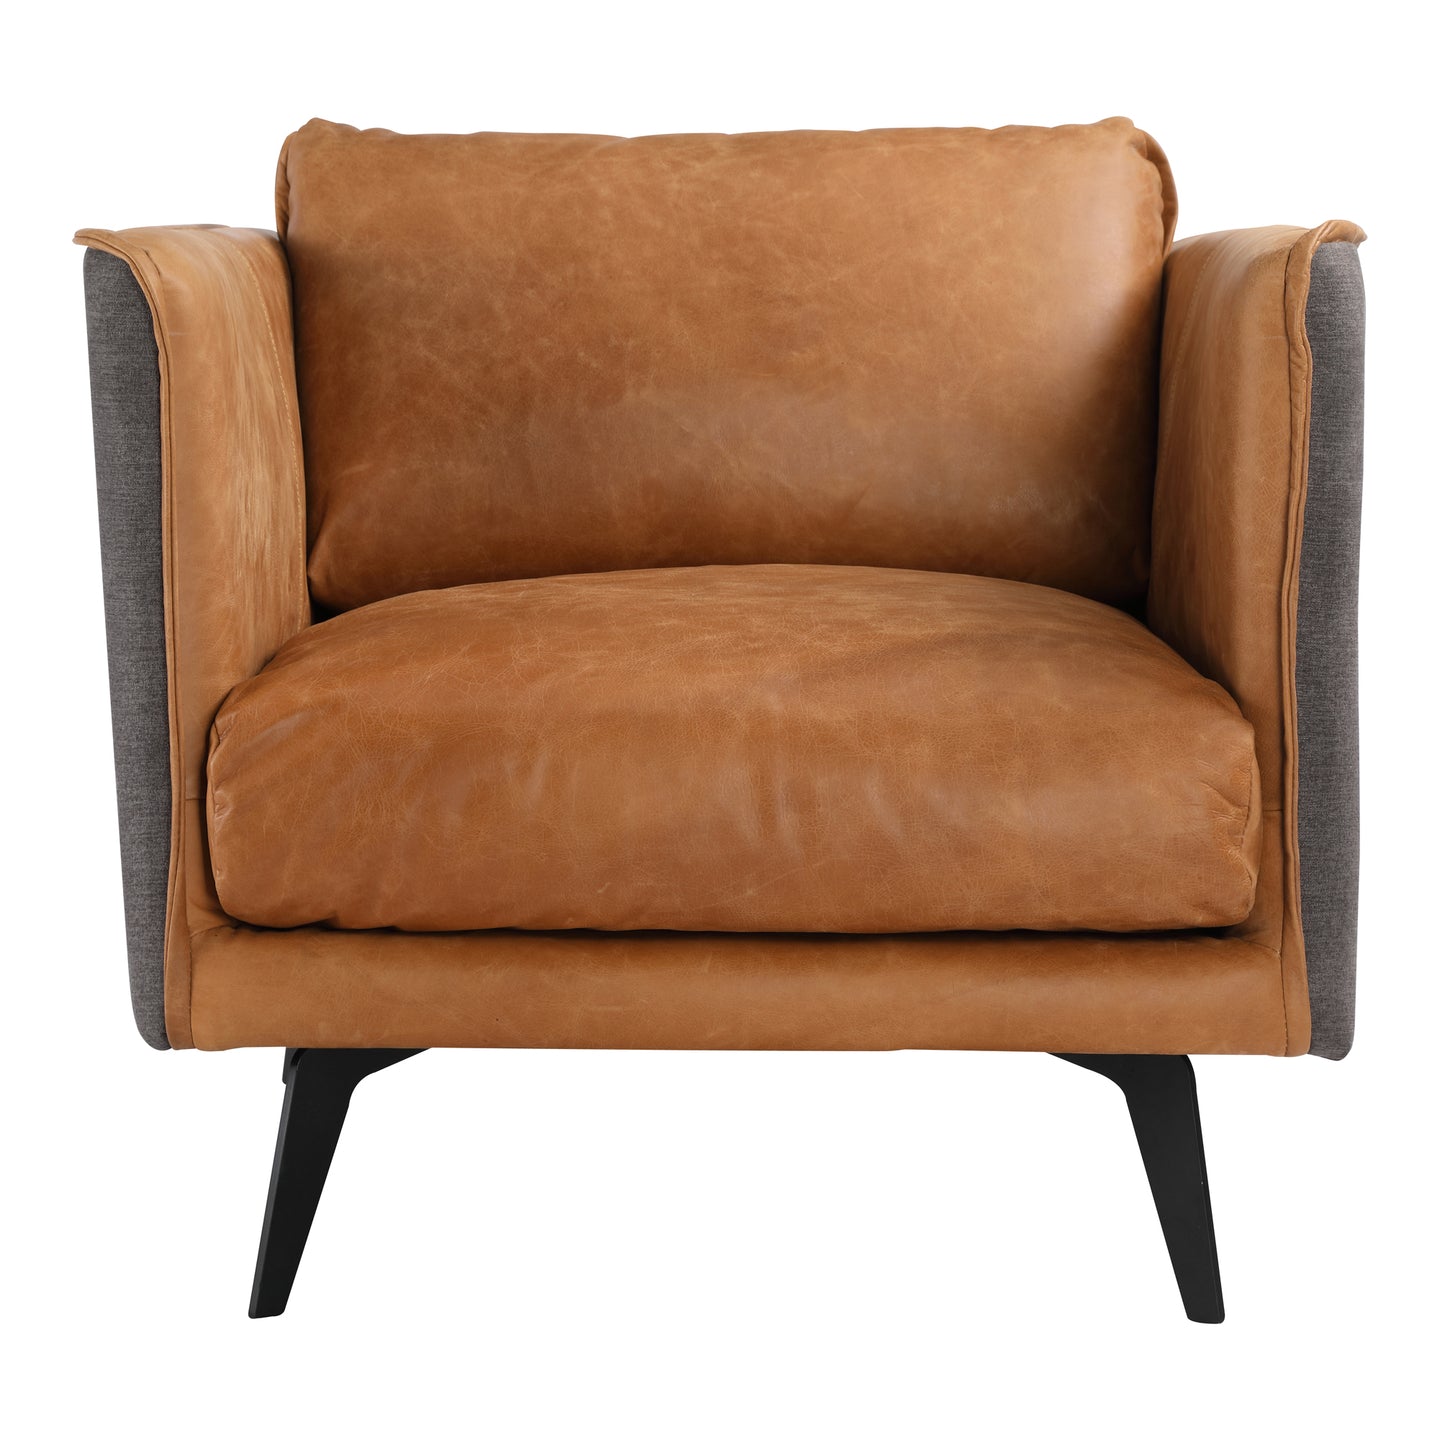 MESSINA LEATHER ARM CHAIR COGNAC